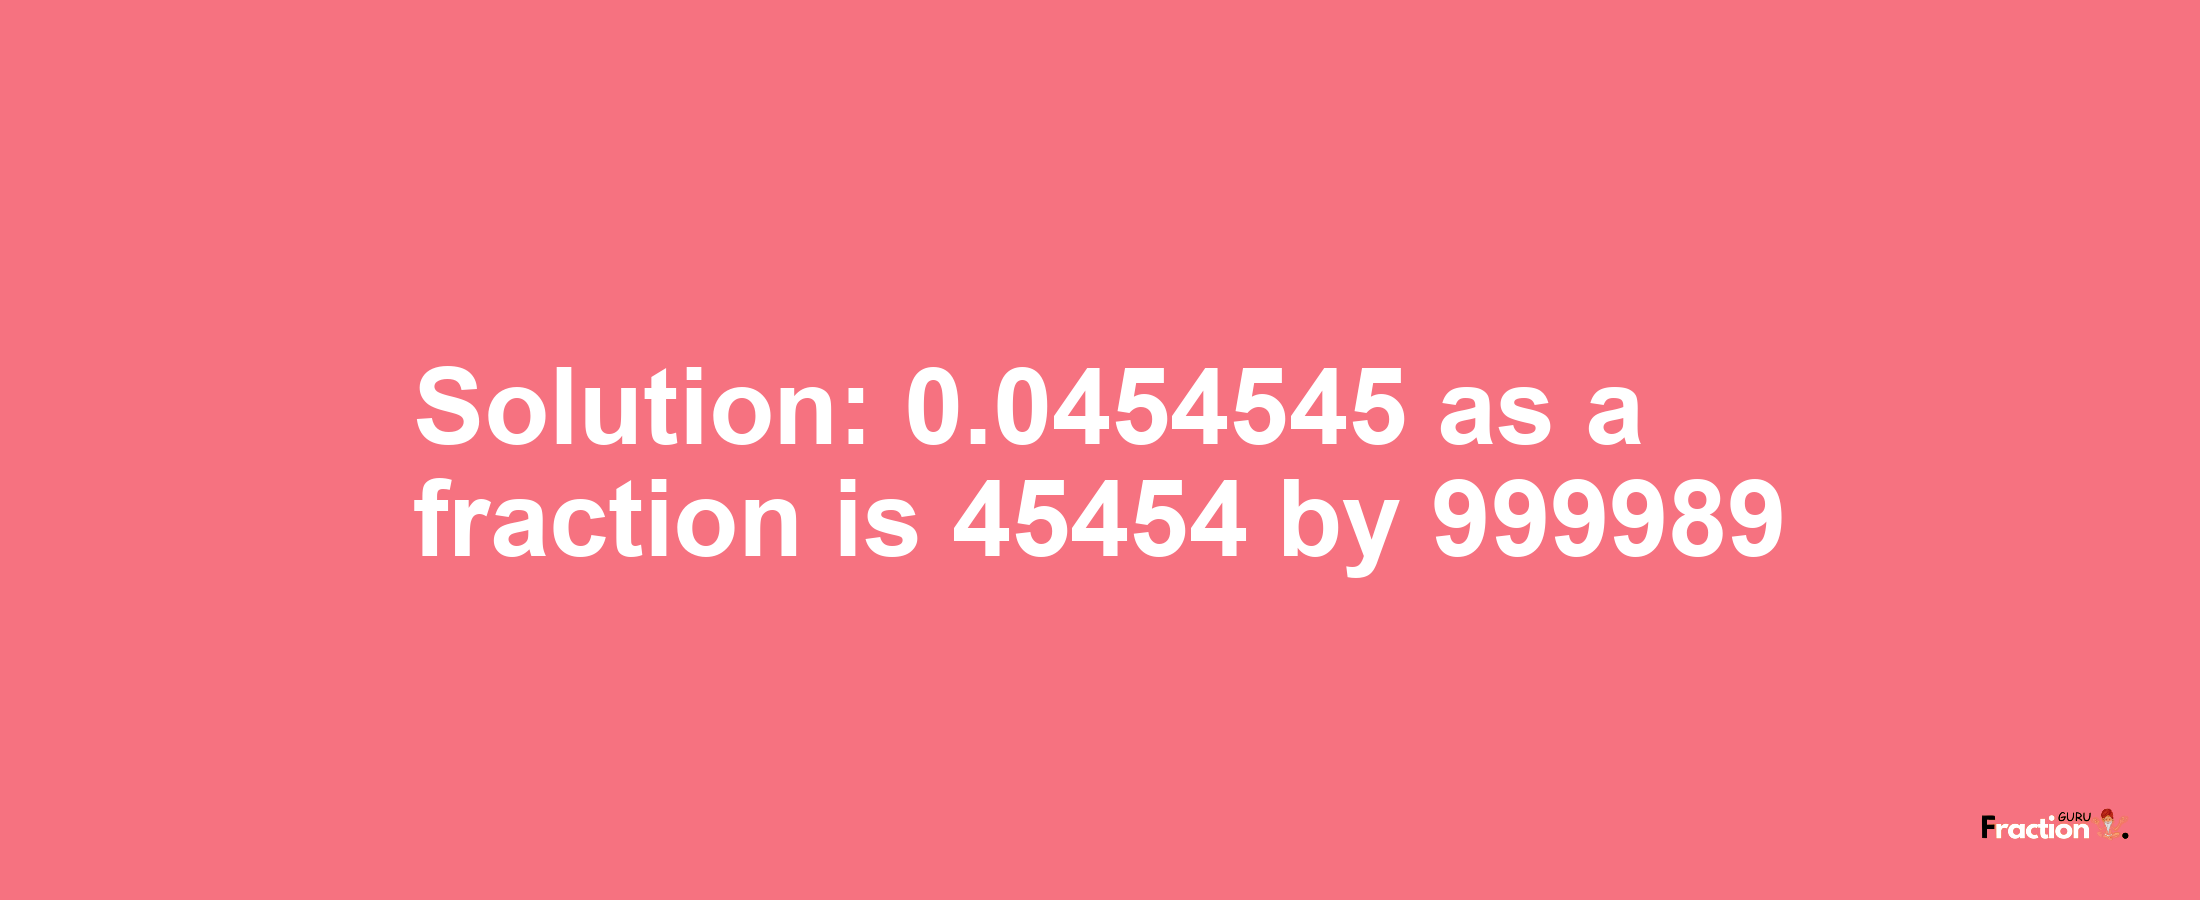 Solution:0.0454545 as a fraction is 45454/999989